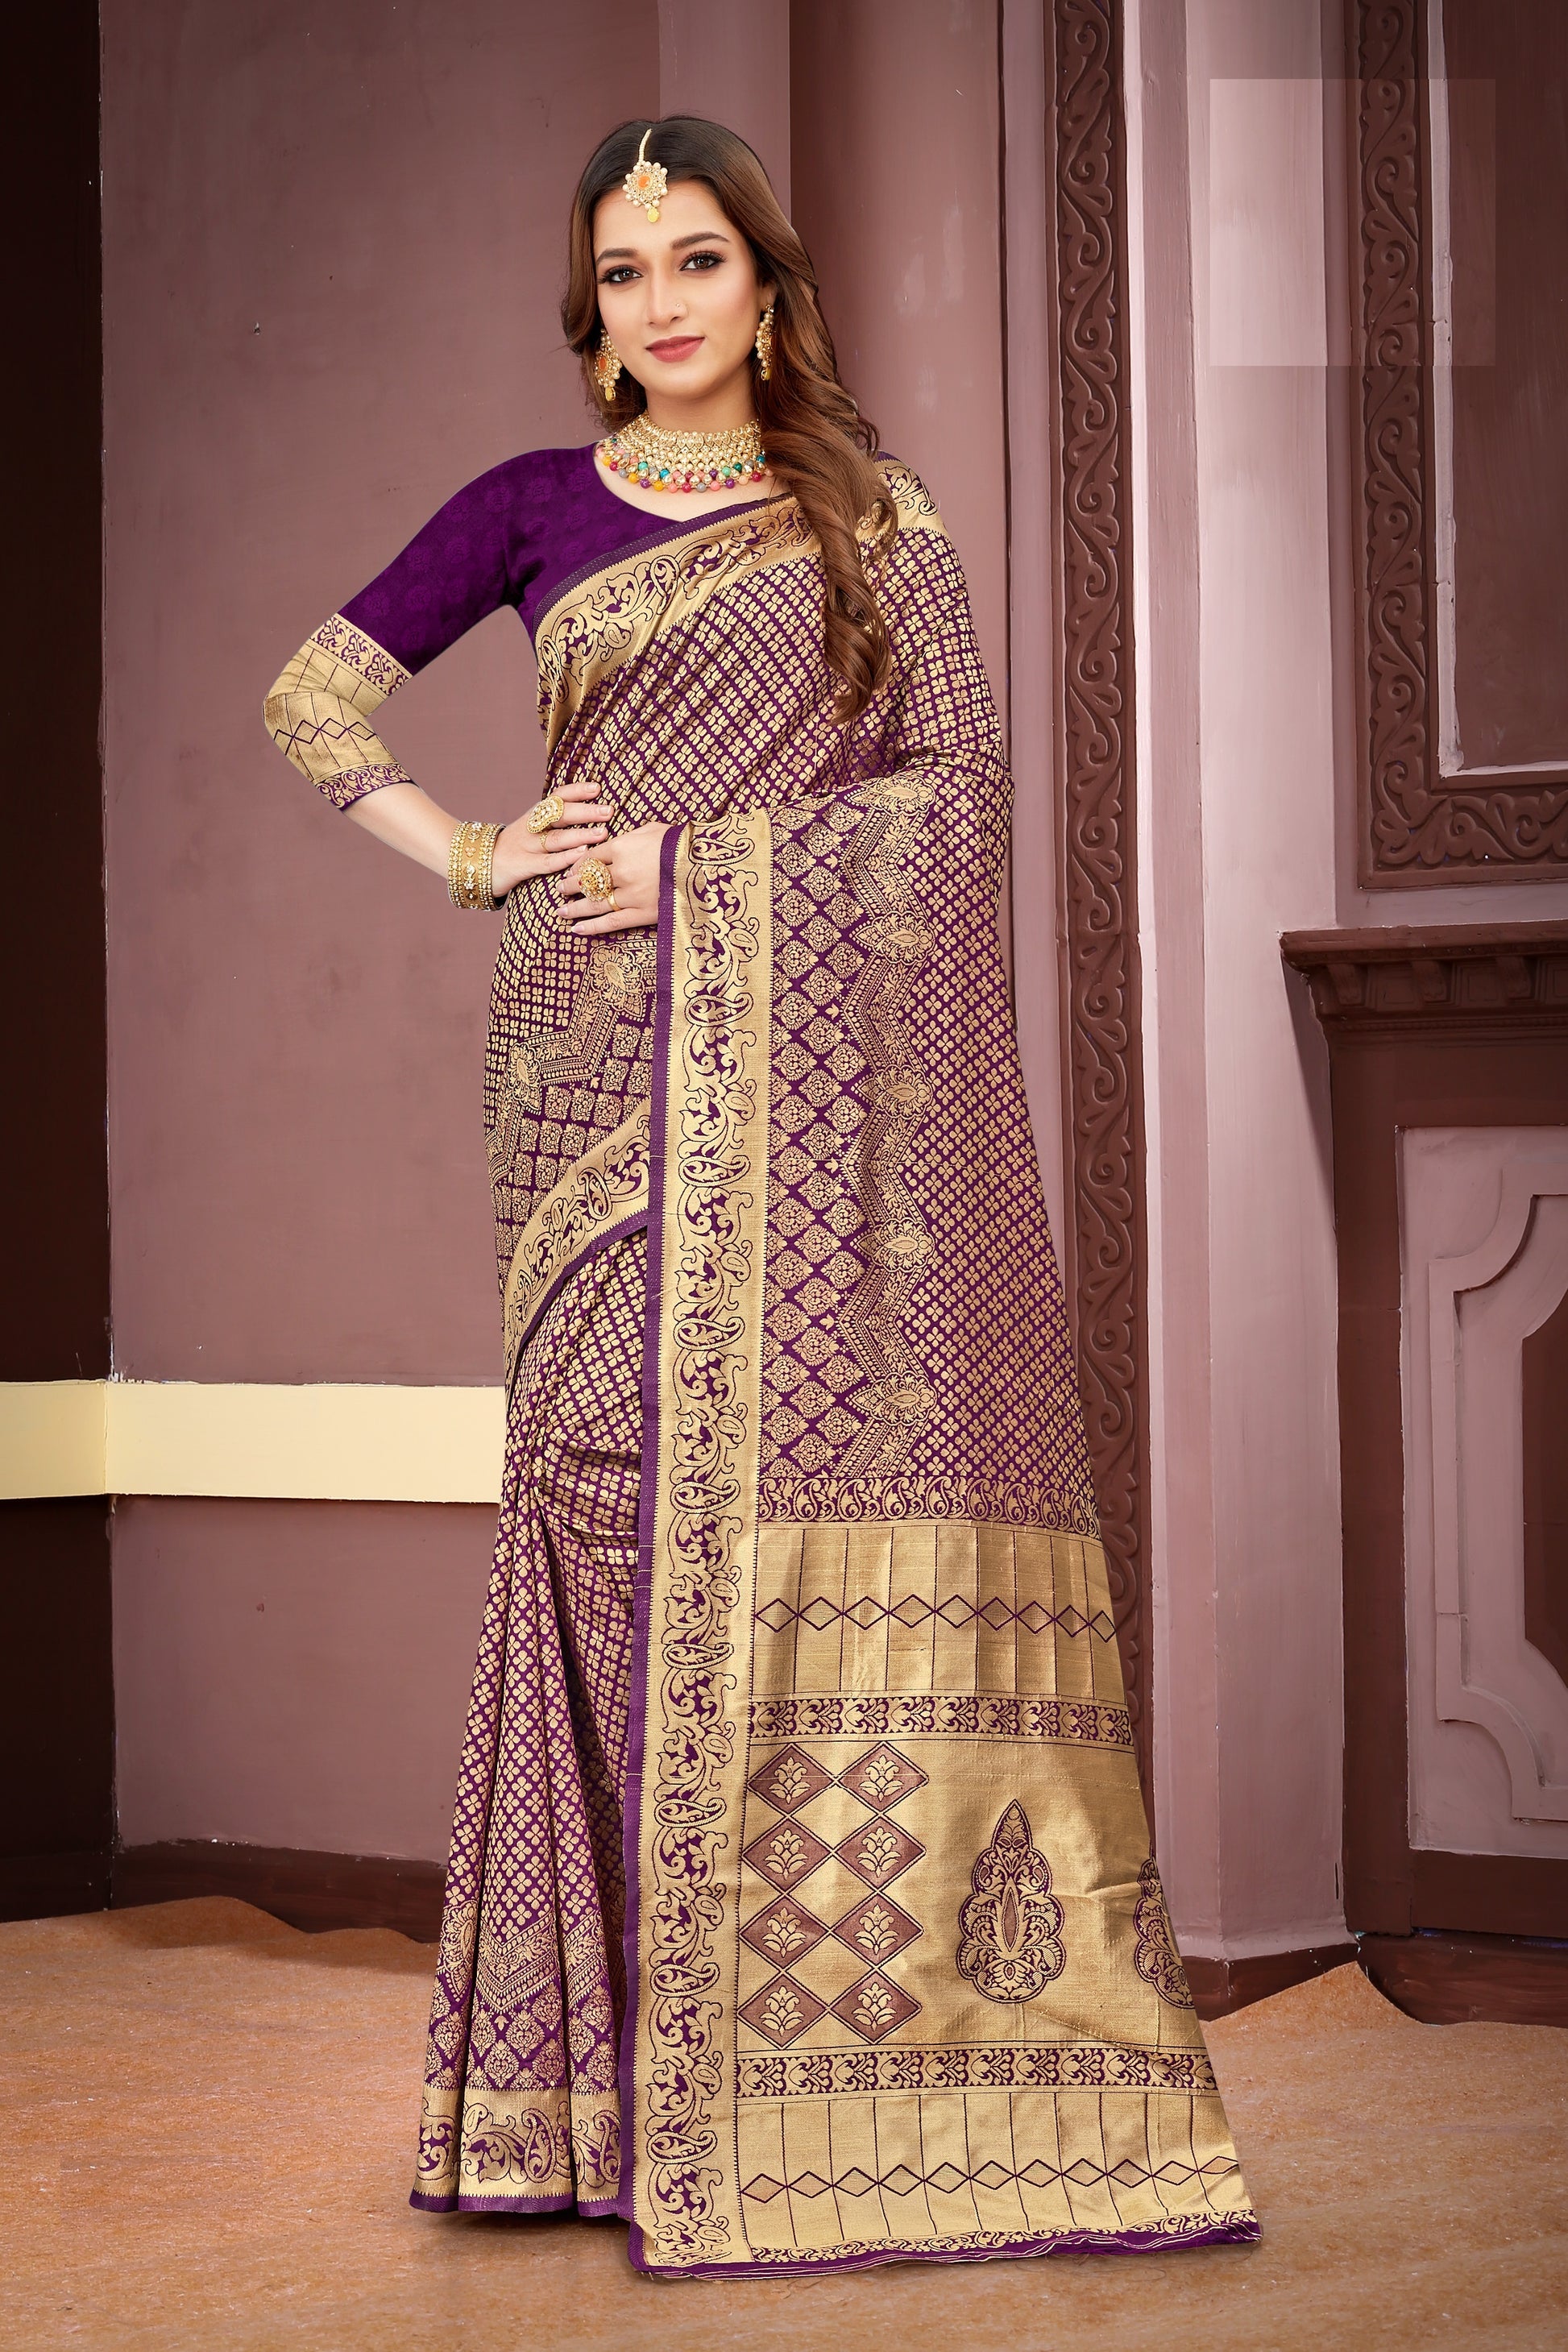 FASHION BOOMS VIOLET BANARSI SILK TRADITIONAL SAREE WITH 7 OTHER COLORS FOR WHOLE FAMILY TO WEAR ON ANY OCCASION .